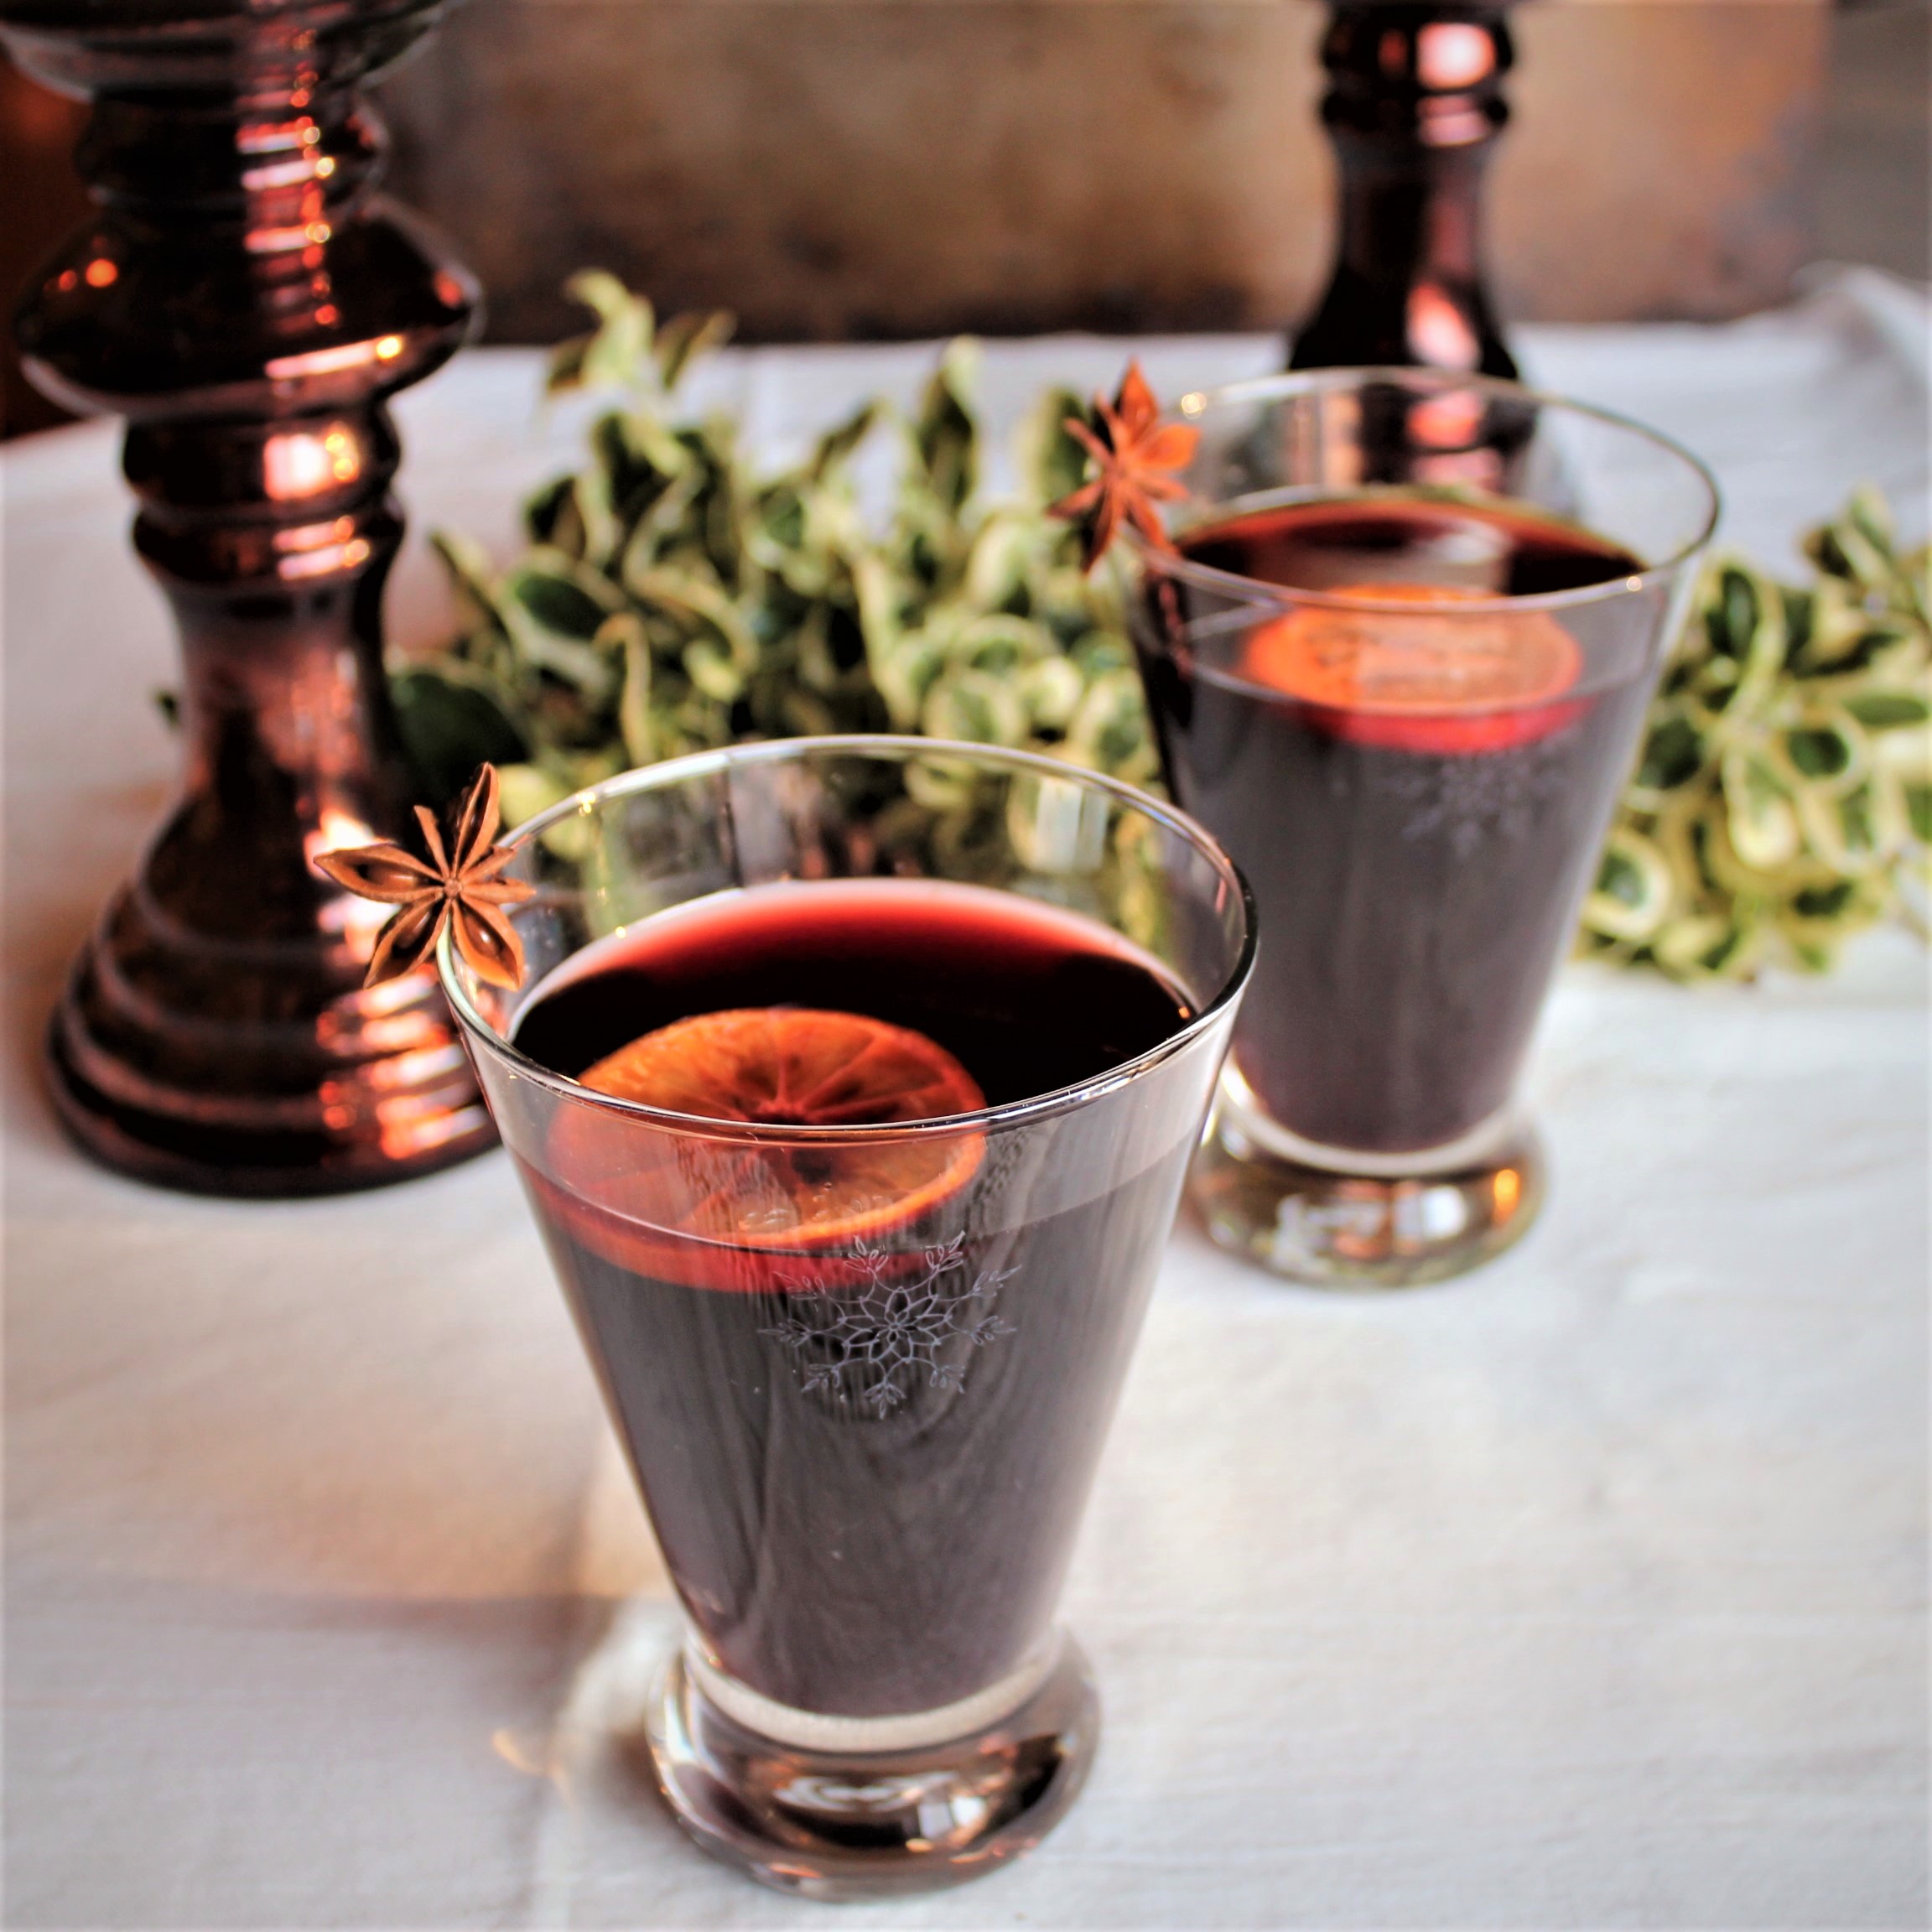 Two glasses of warm, mulled wine